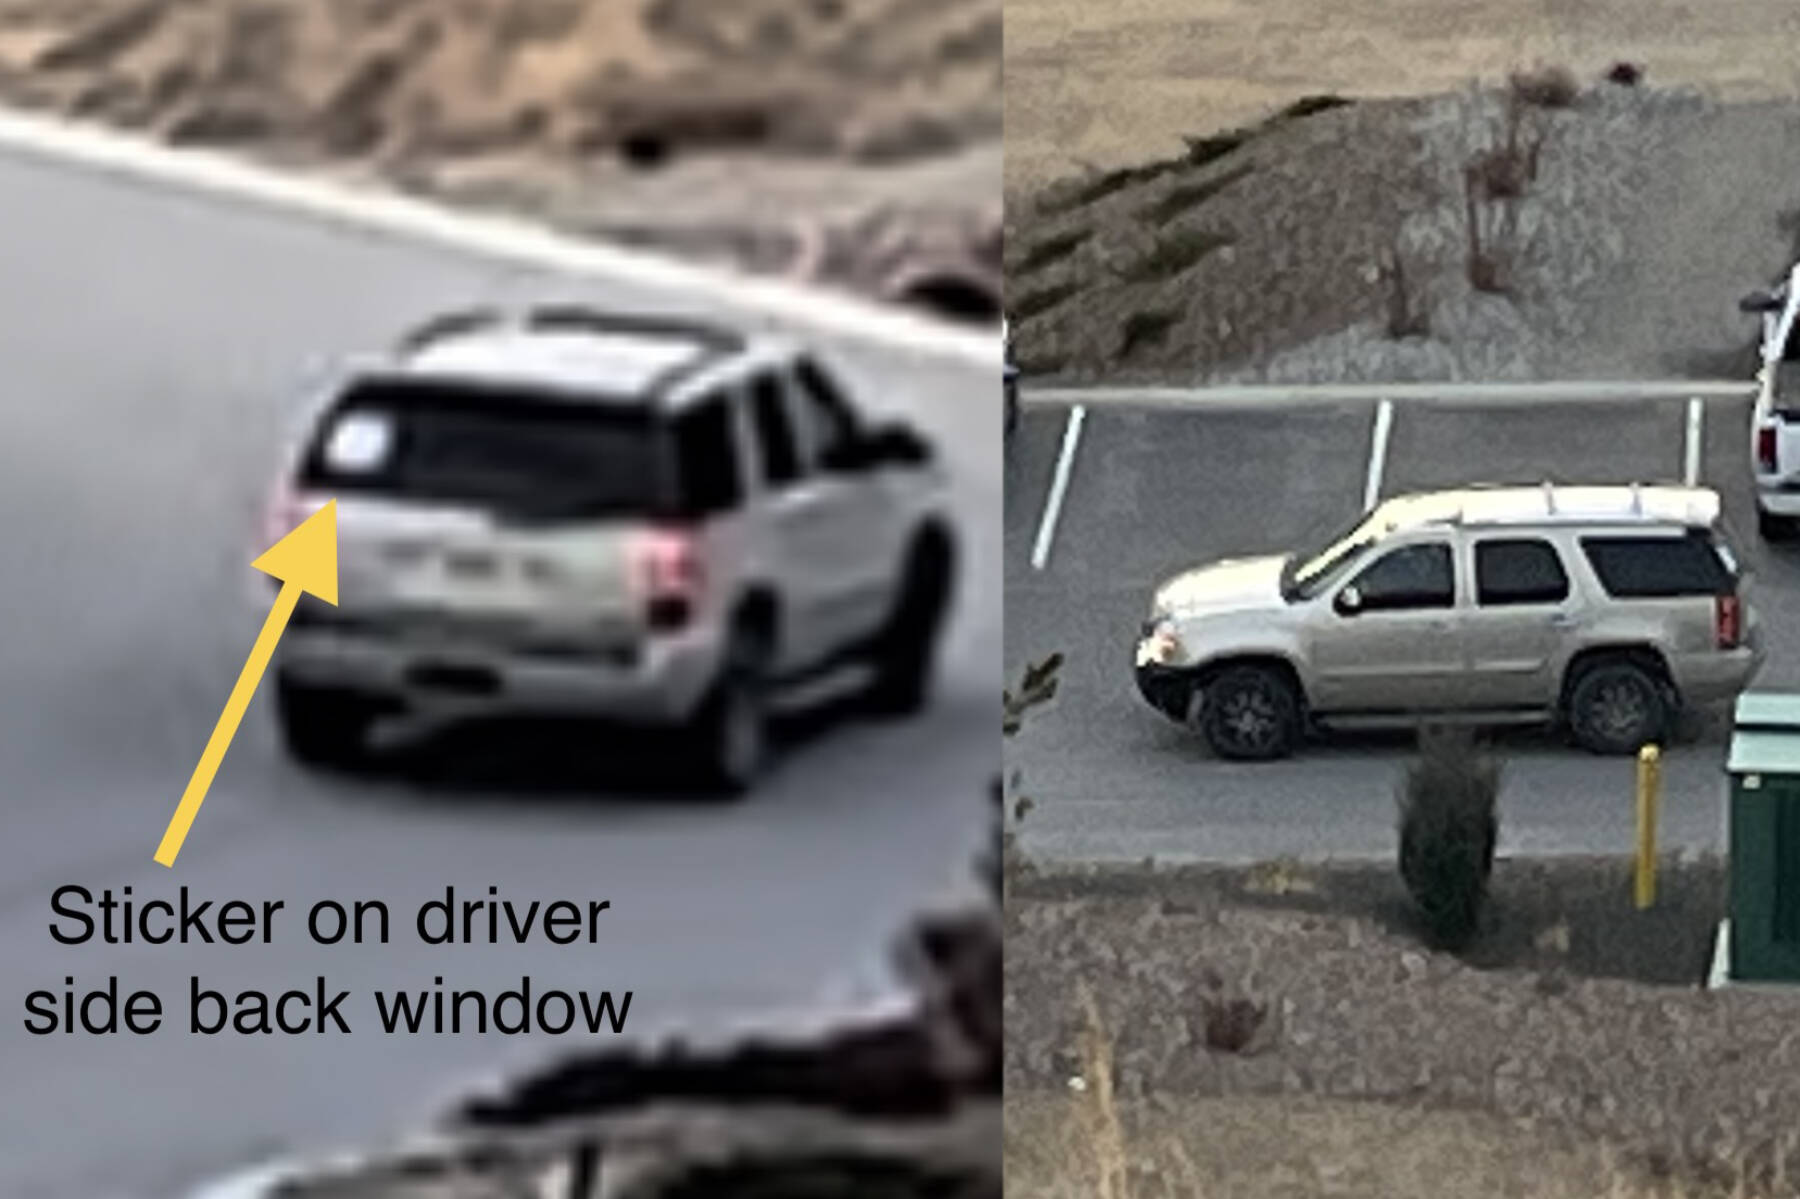 The vehicle RCMP believe to be connected to recent catalytic converter thefts in the South Okanagan. The sticker on the back has been described as a temporary operator's permit. (RCMP)